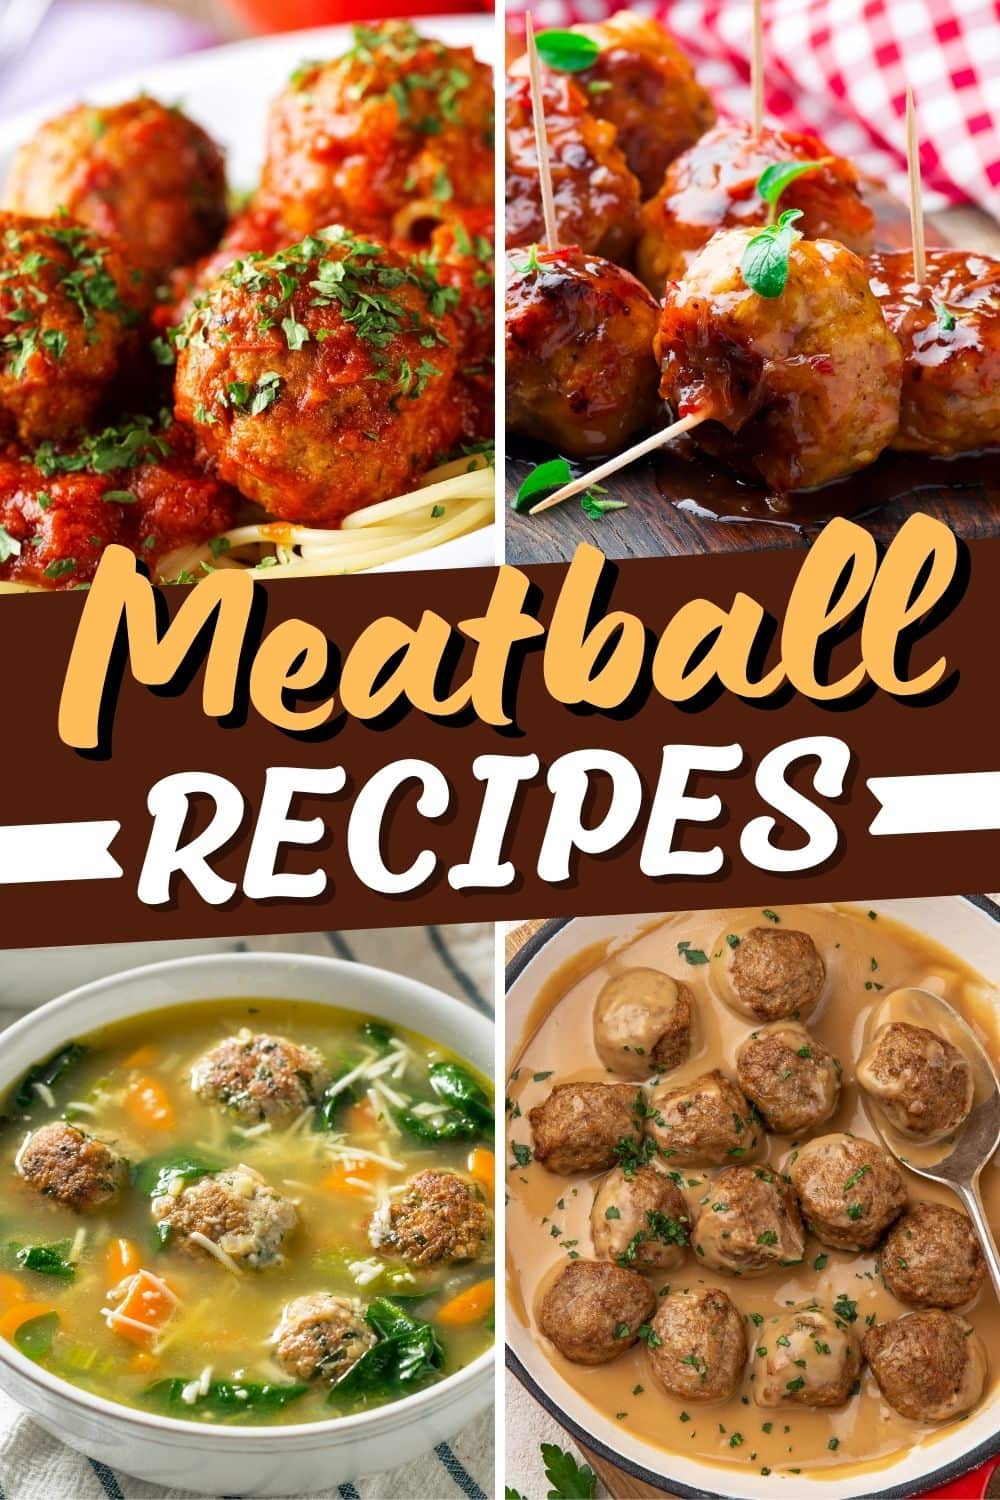 30 Easy Meatball Recipes From Around the World - Insanely Good